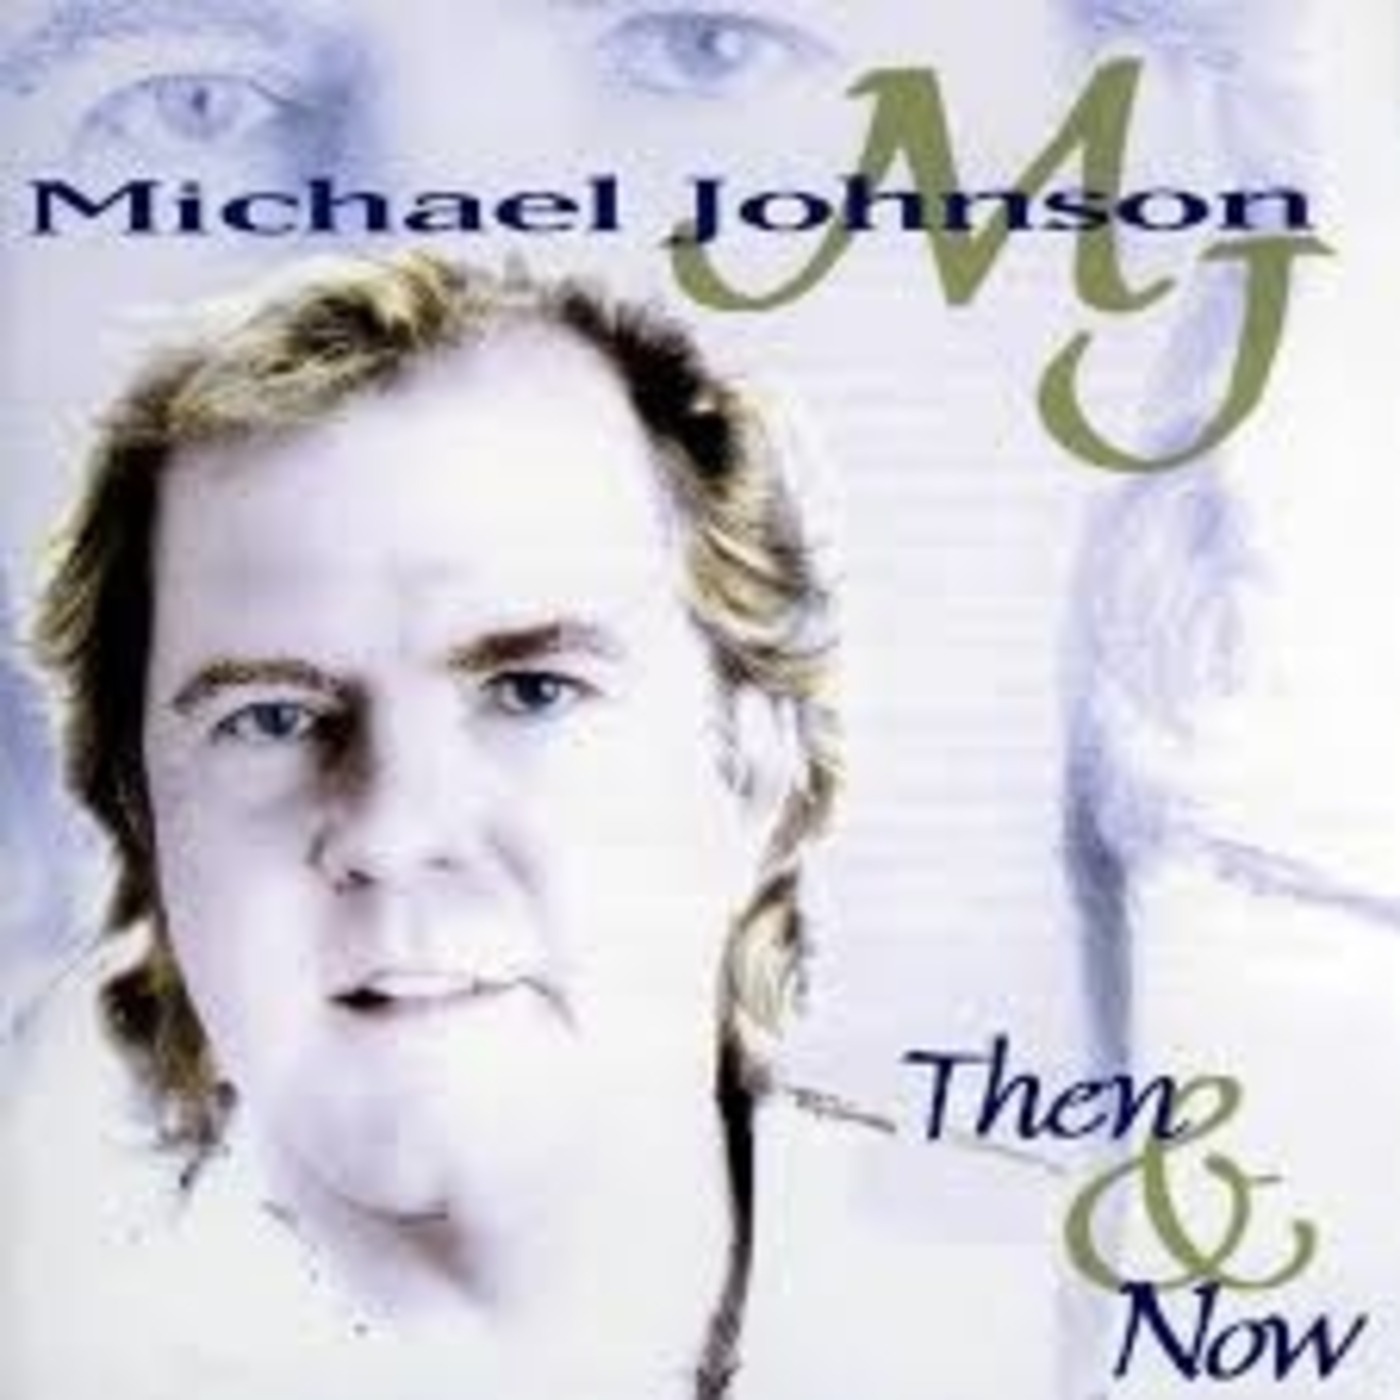 Give Me Wings by Michael Johnson